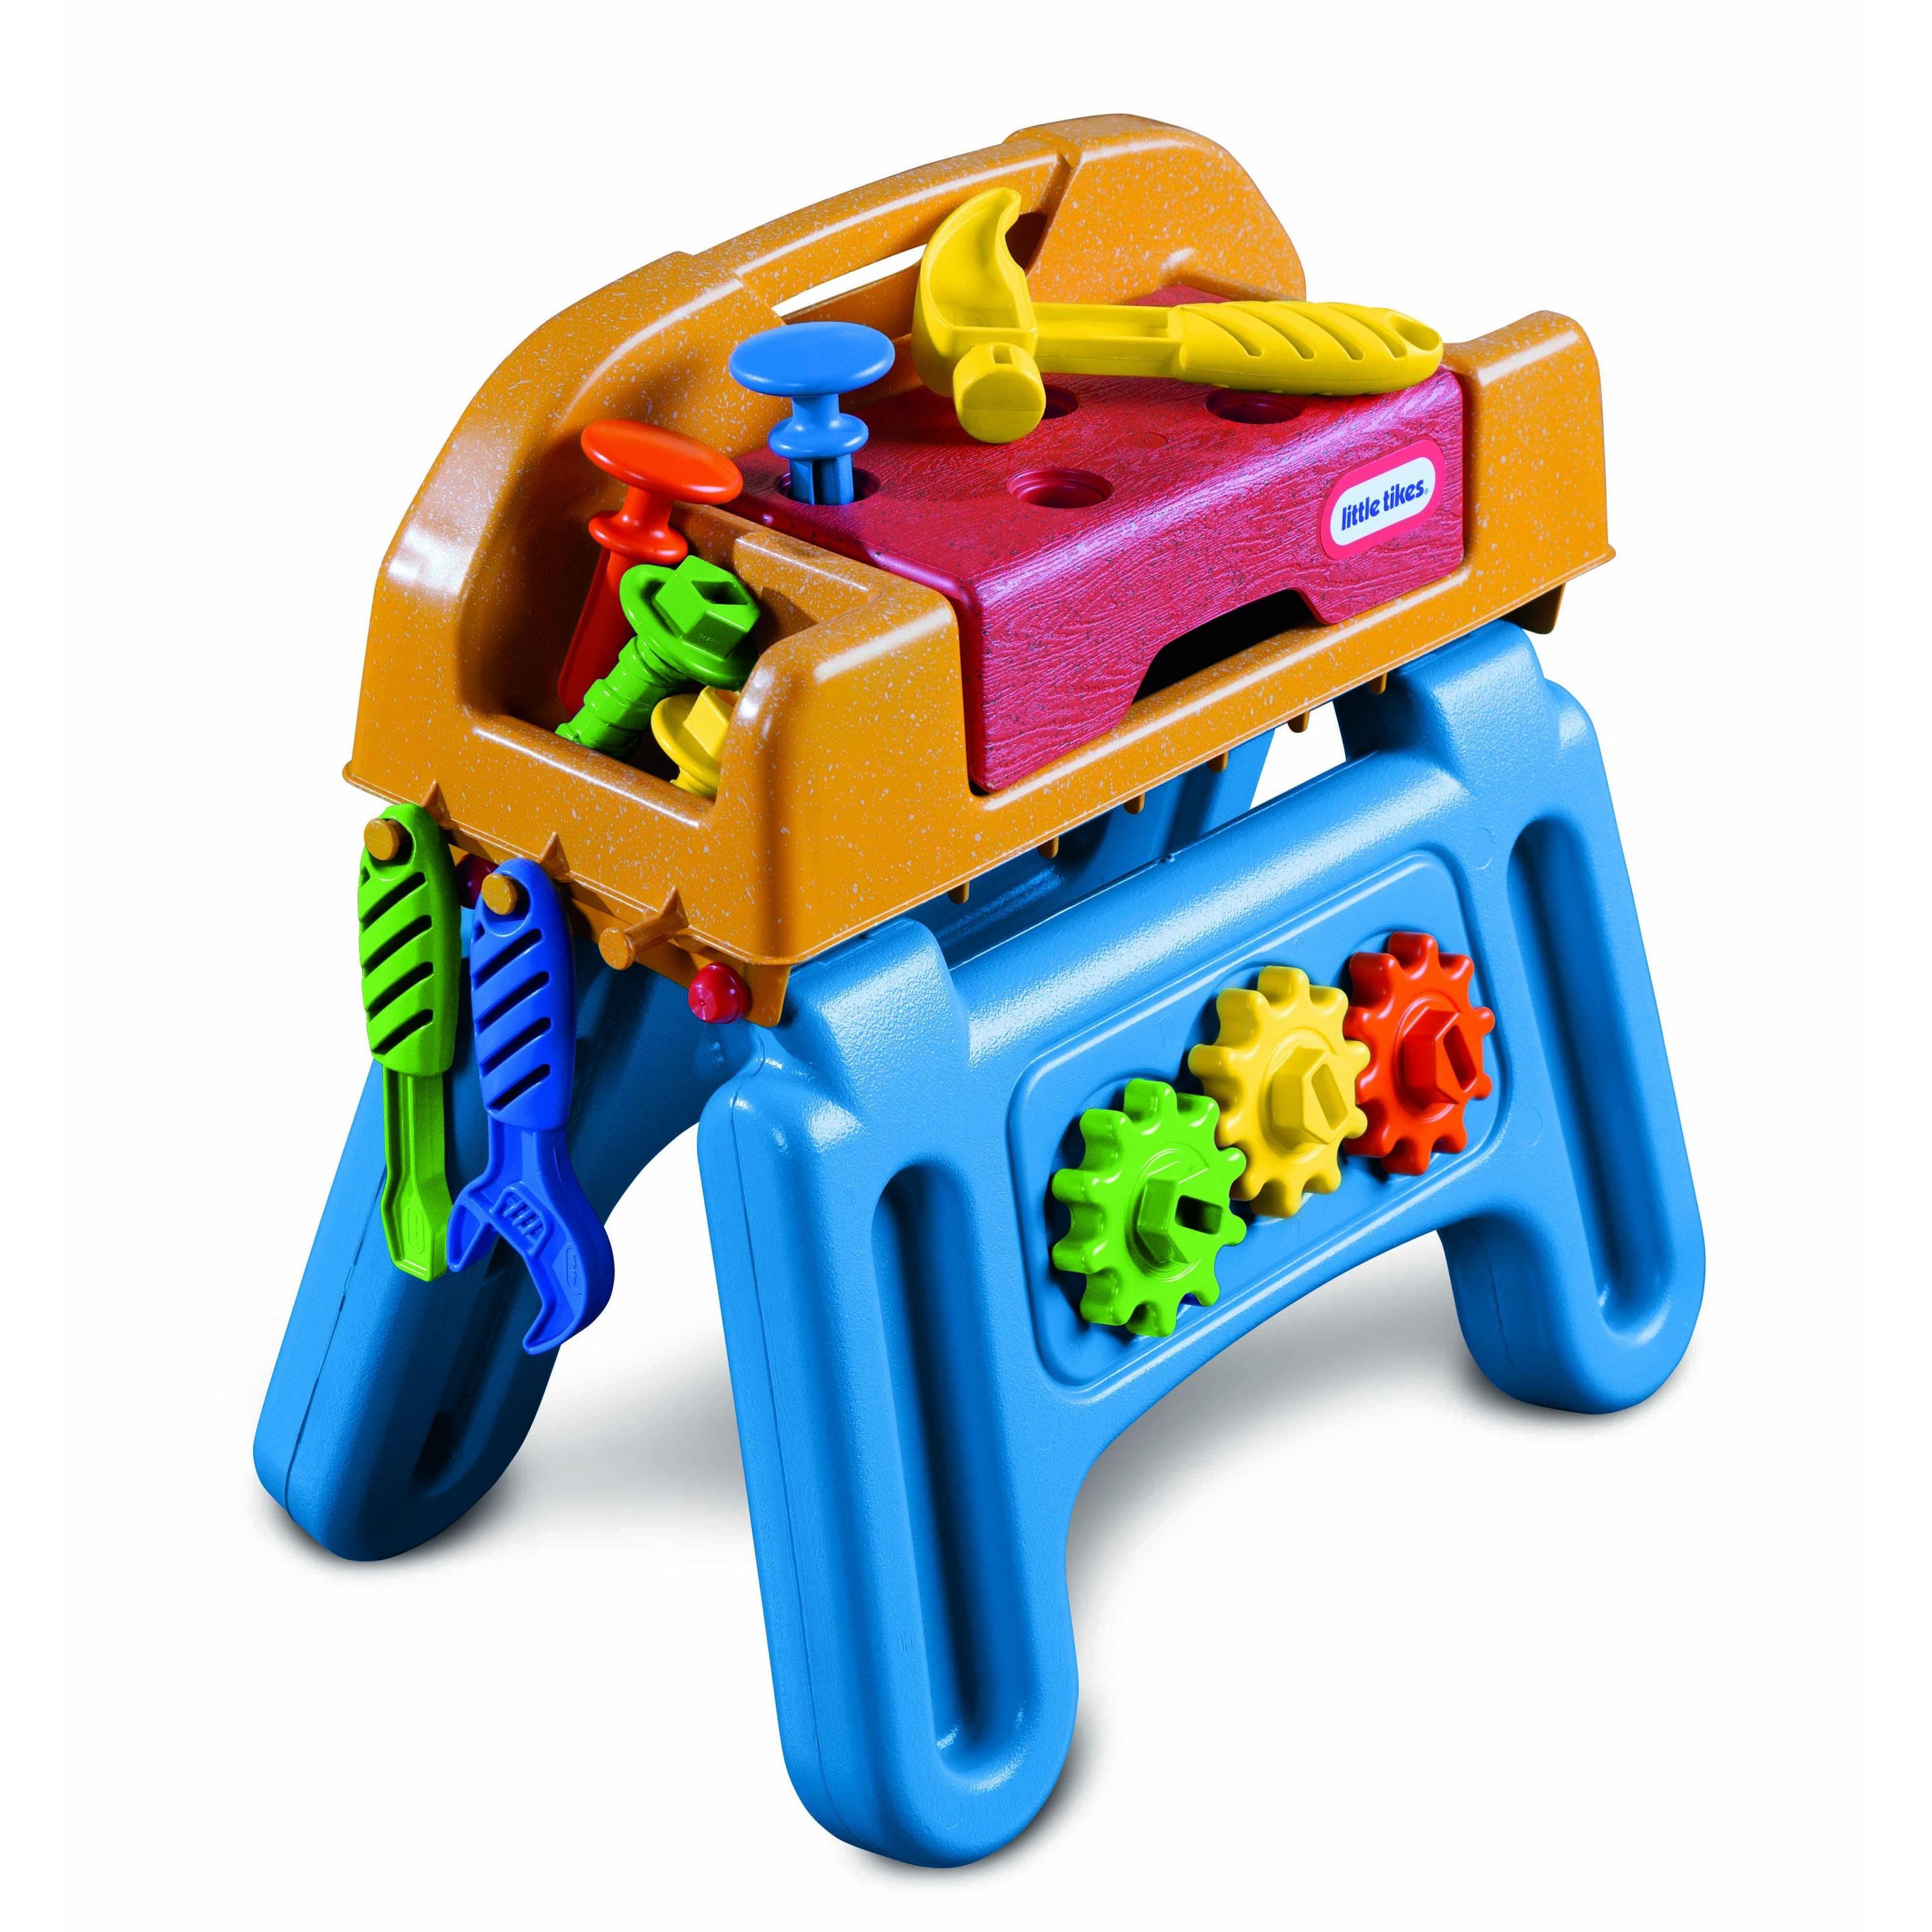 little tikes toy bench